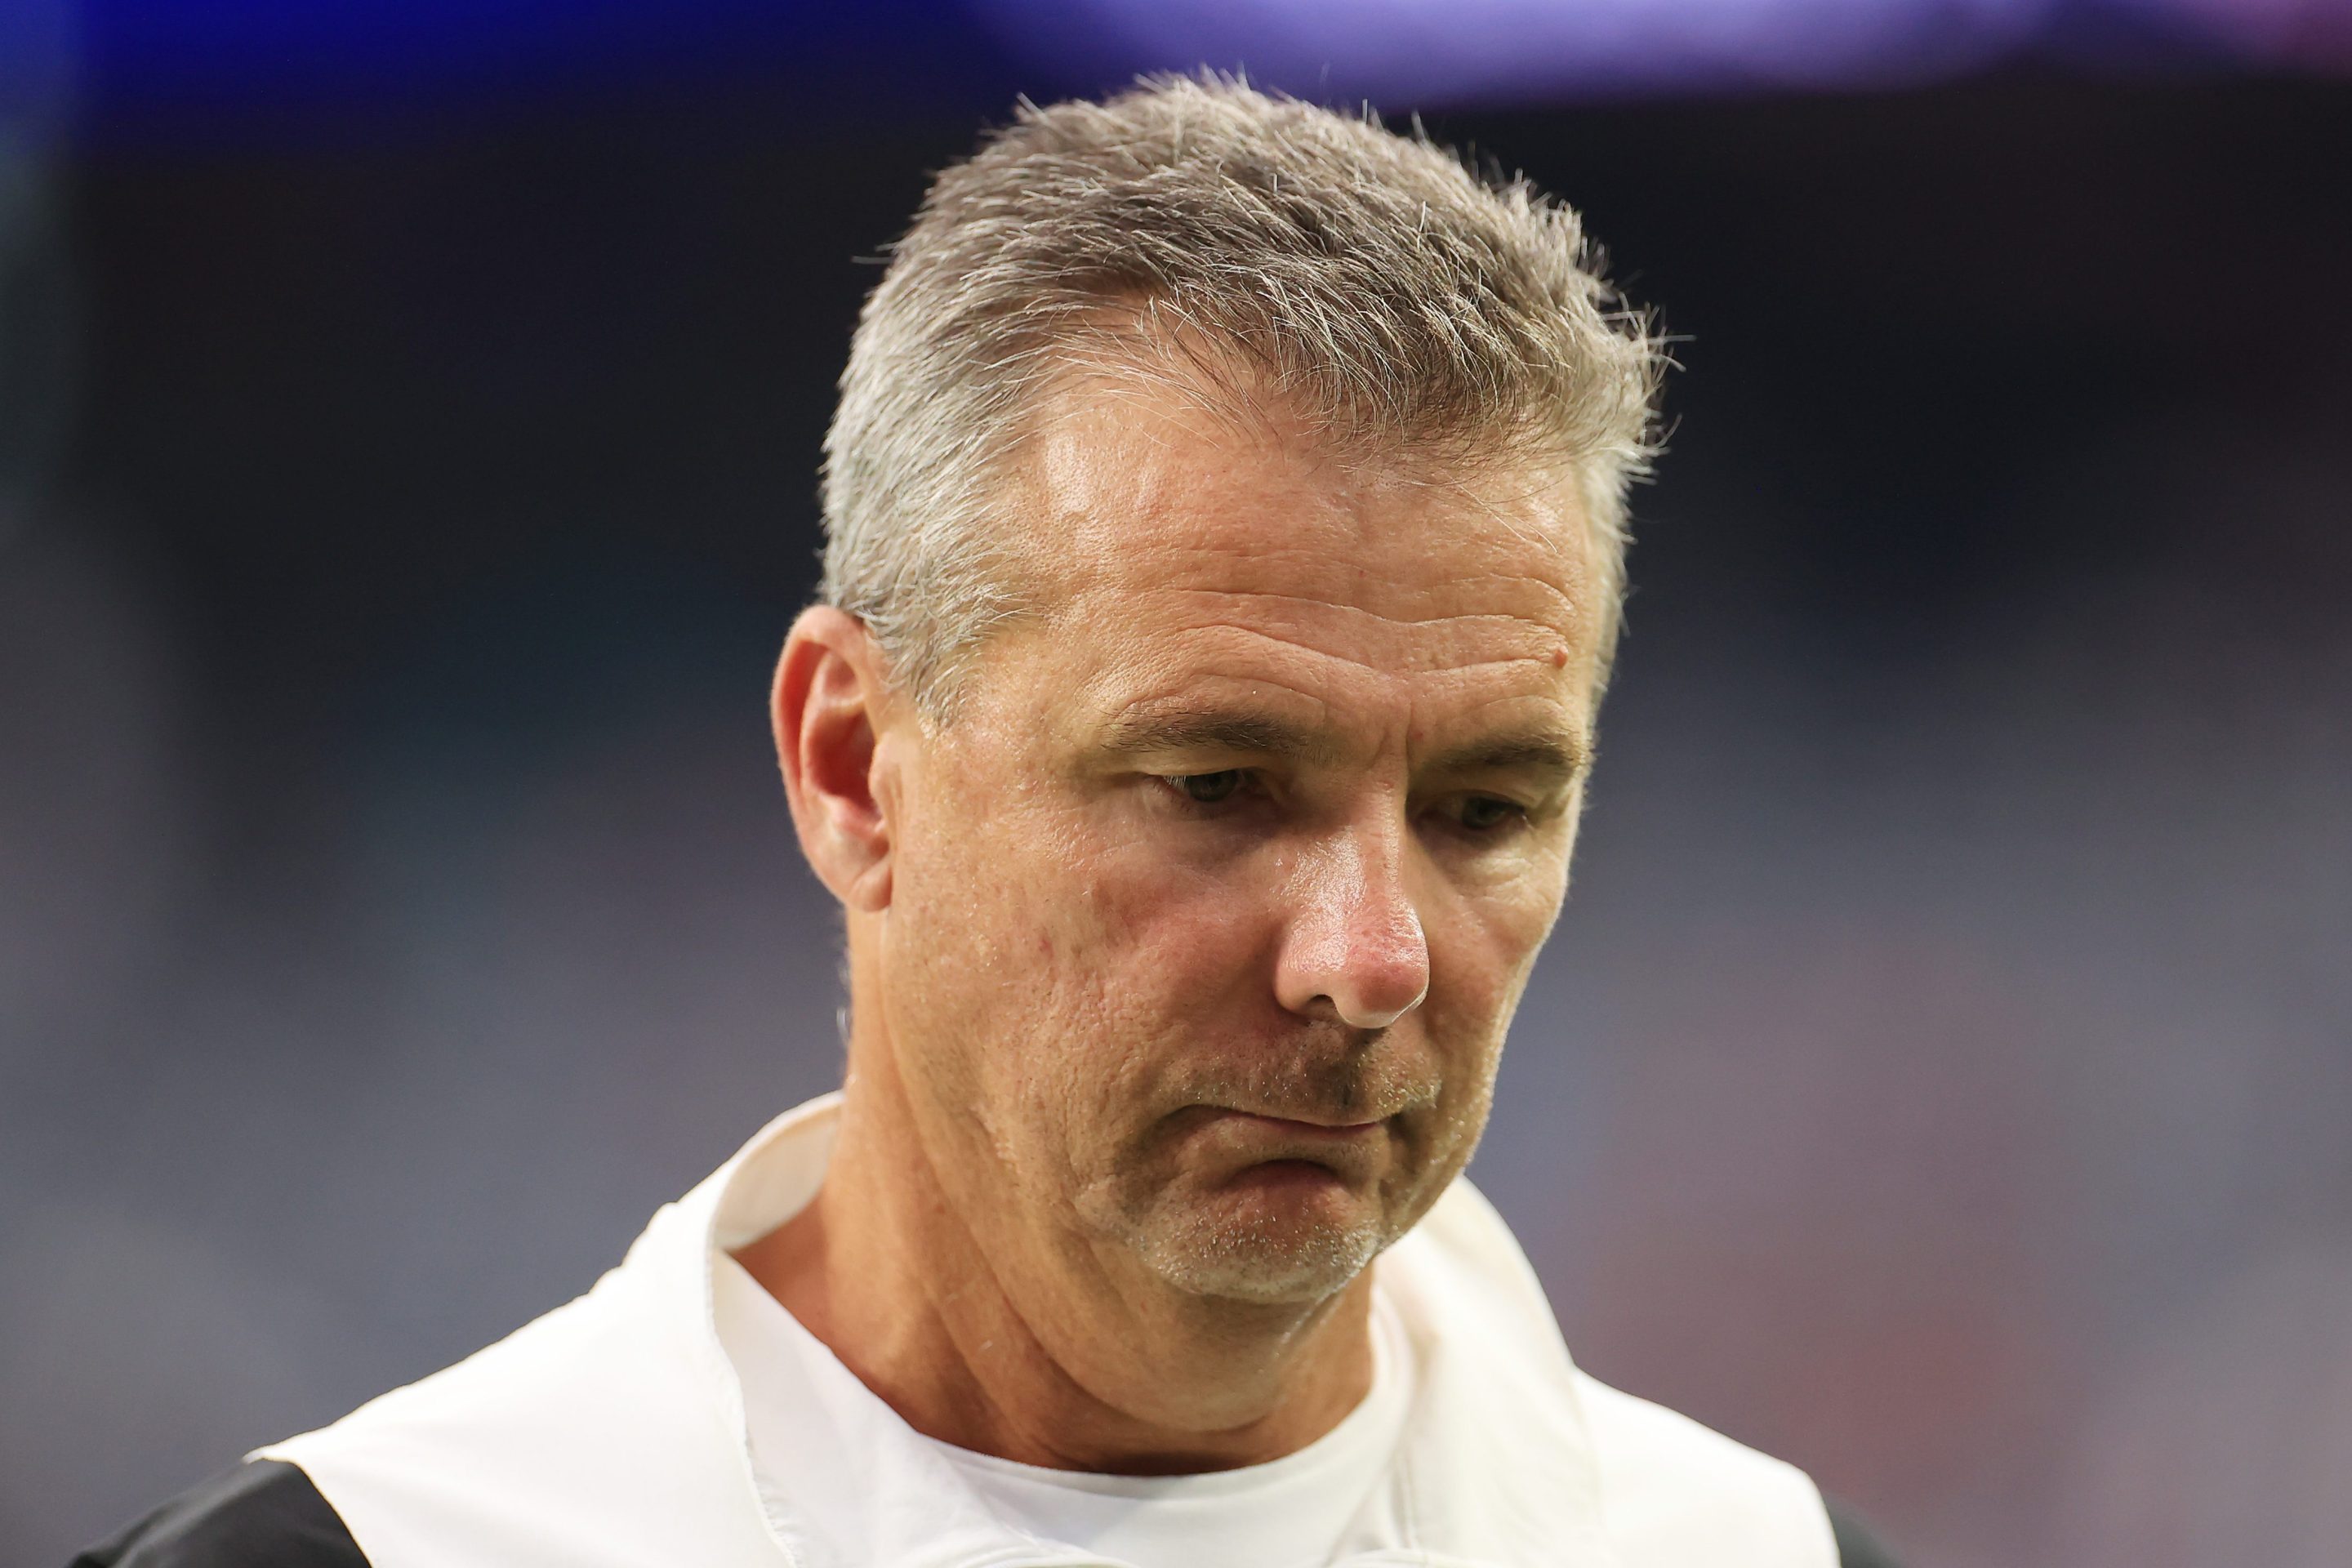 Then-head coach Urban Meyer of the Jacksonville Jaguars reacts after losing to the Houston Texans 37-21 at NRG Stadium on September 12, 2021 in Houston, Texas.